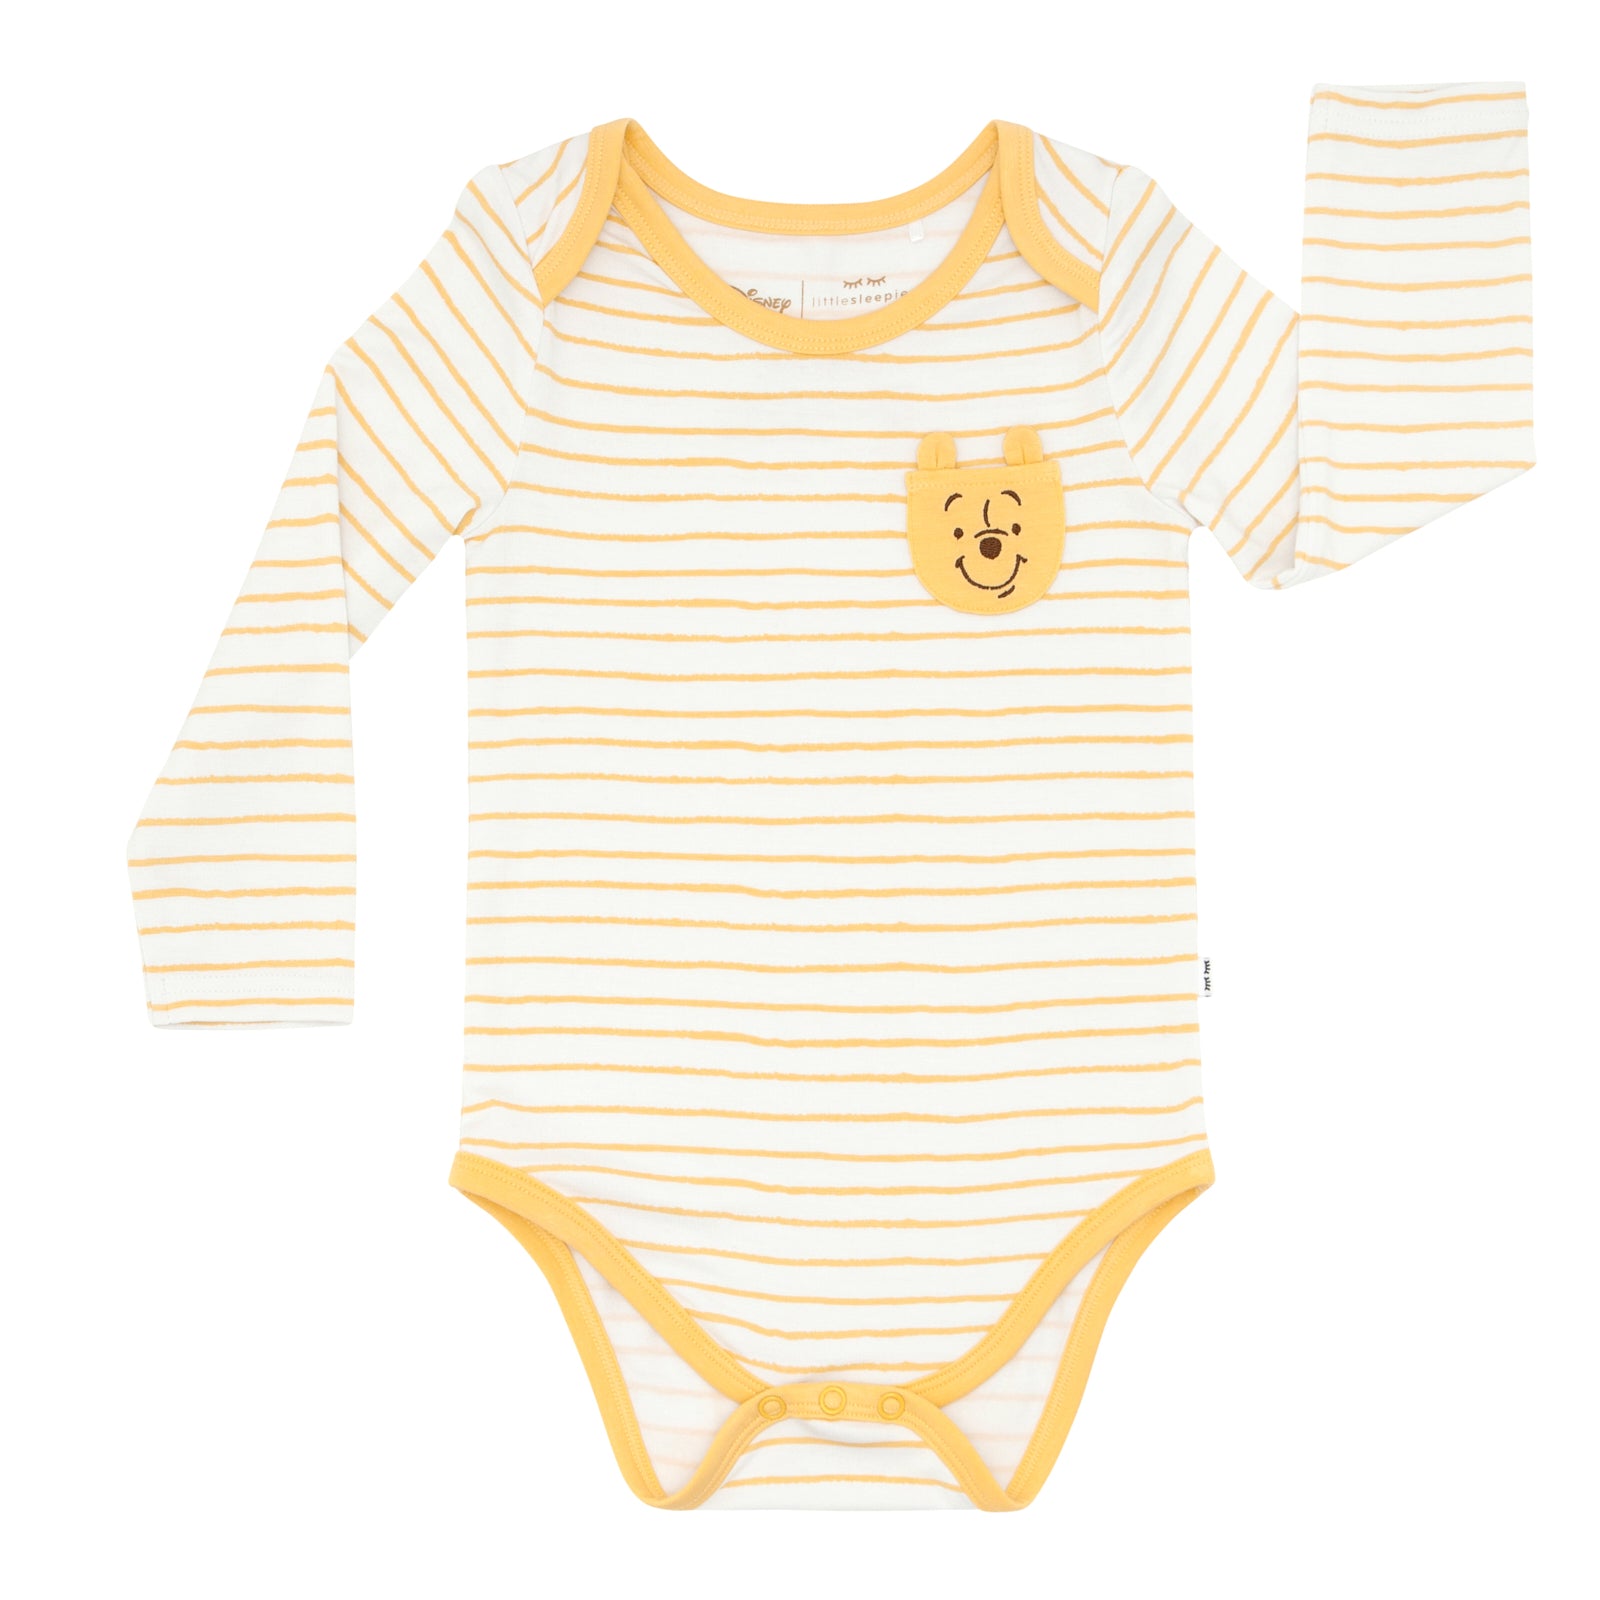 Flat lay image of a Disney Winnie the Pooh graphic pocket bodysuit